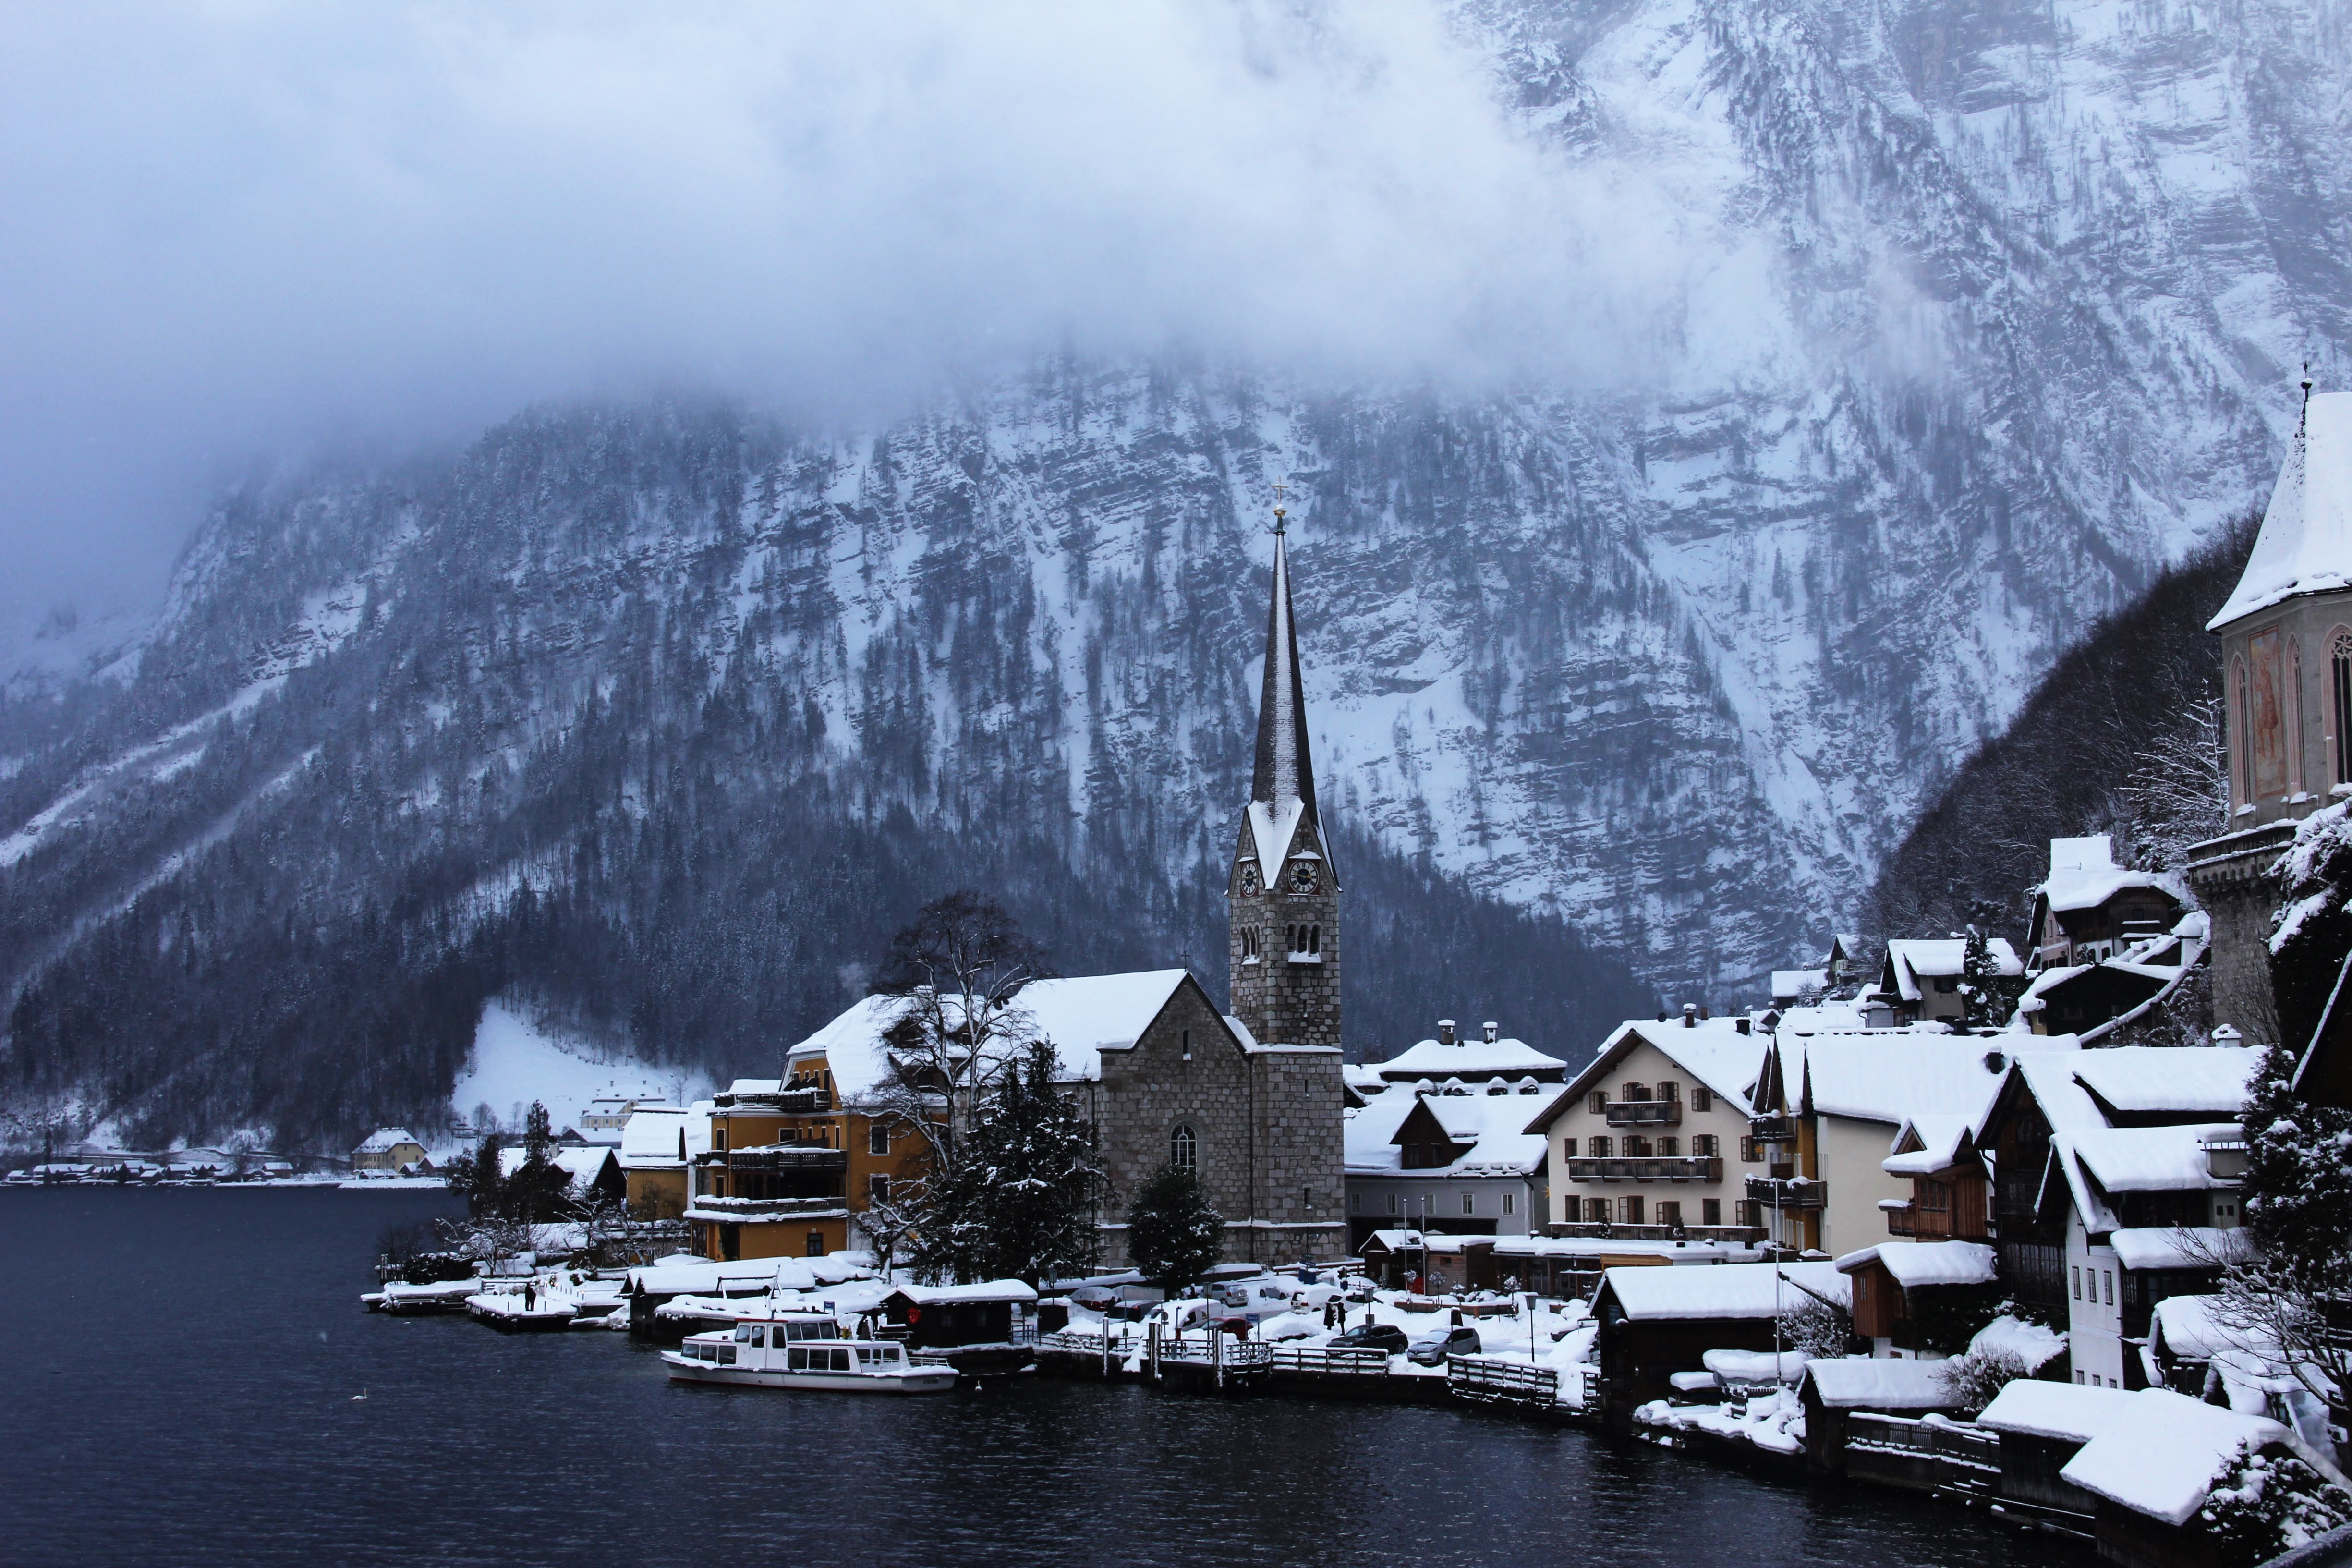 10 Things to Do in Austria in Winter: A Vacay To Cherish!